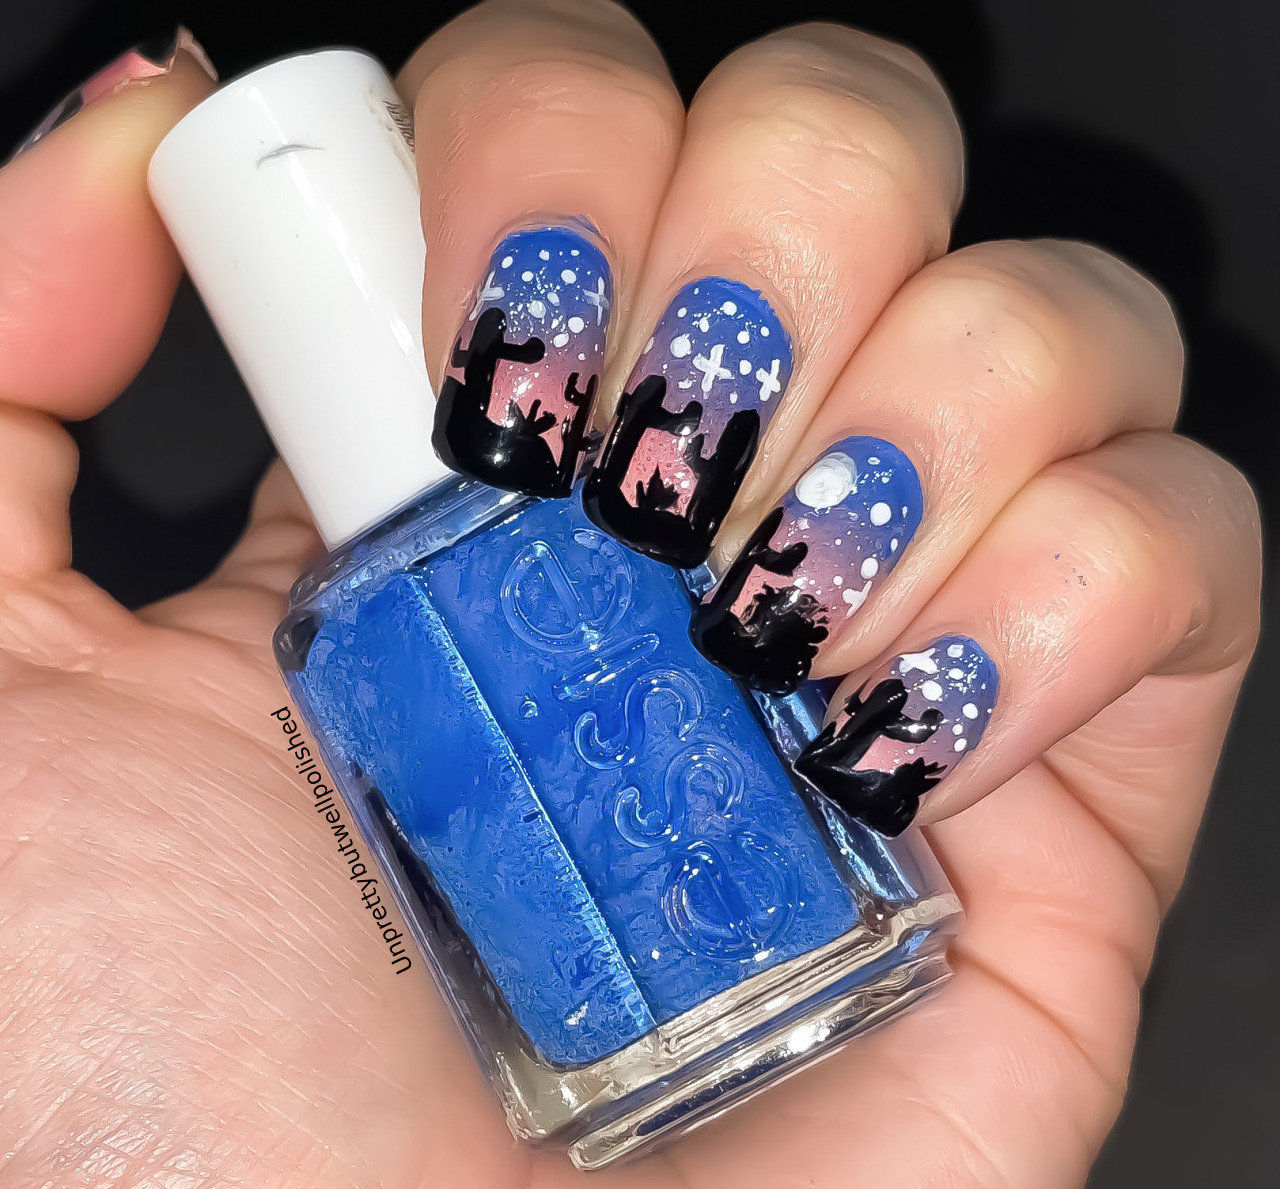 20 Gorgeous Nail Design for Prom Night - The Nail Bar Beauty & Co.